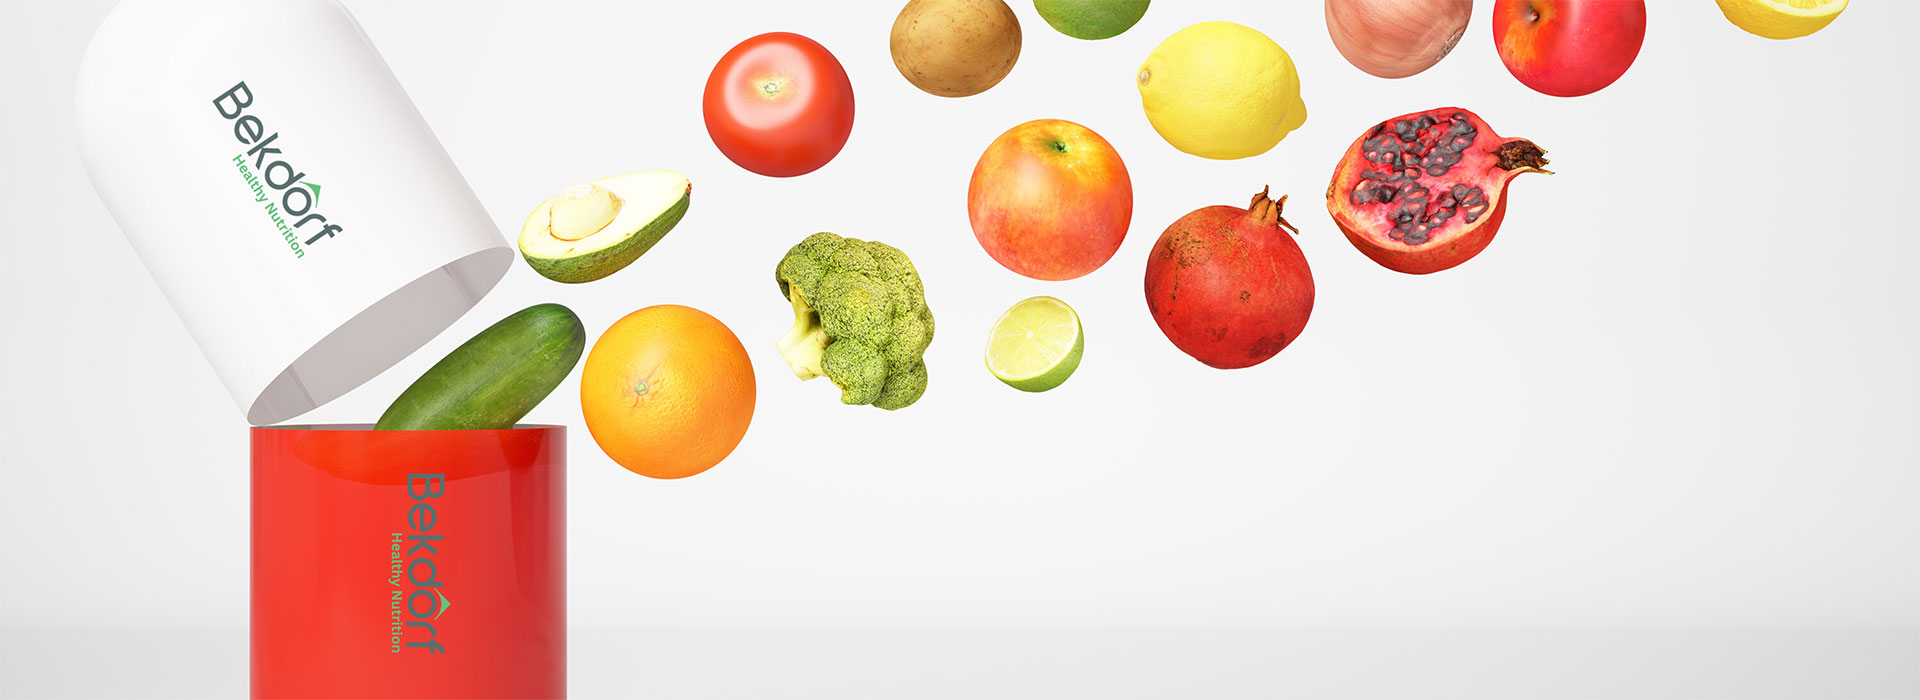 healthy-nutrition-banner